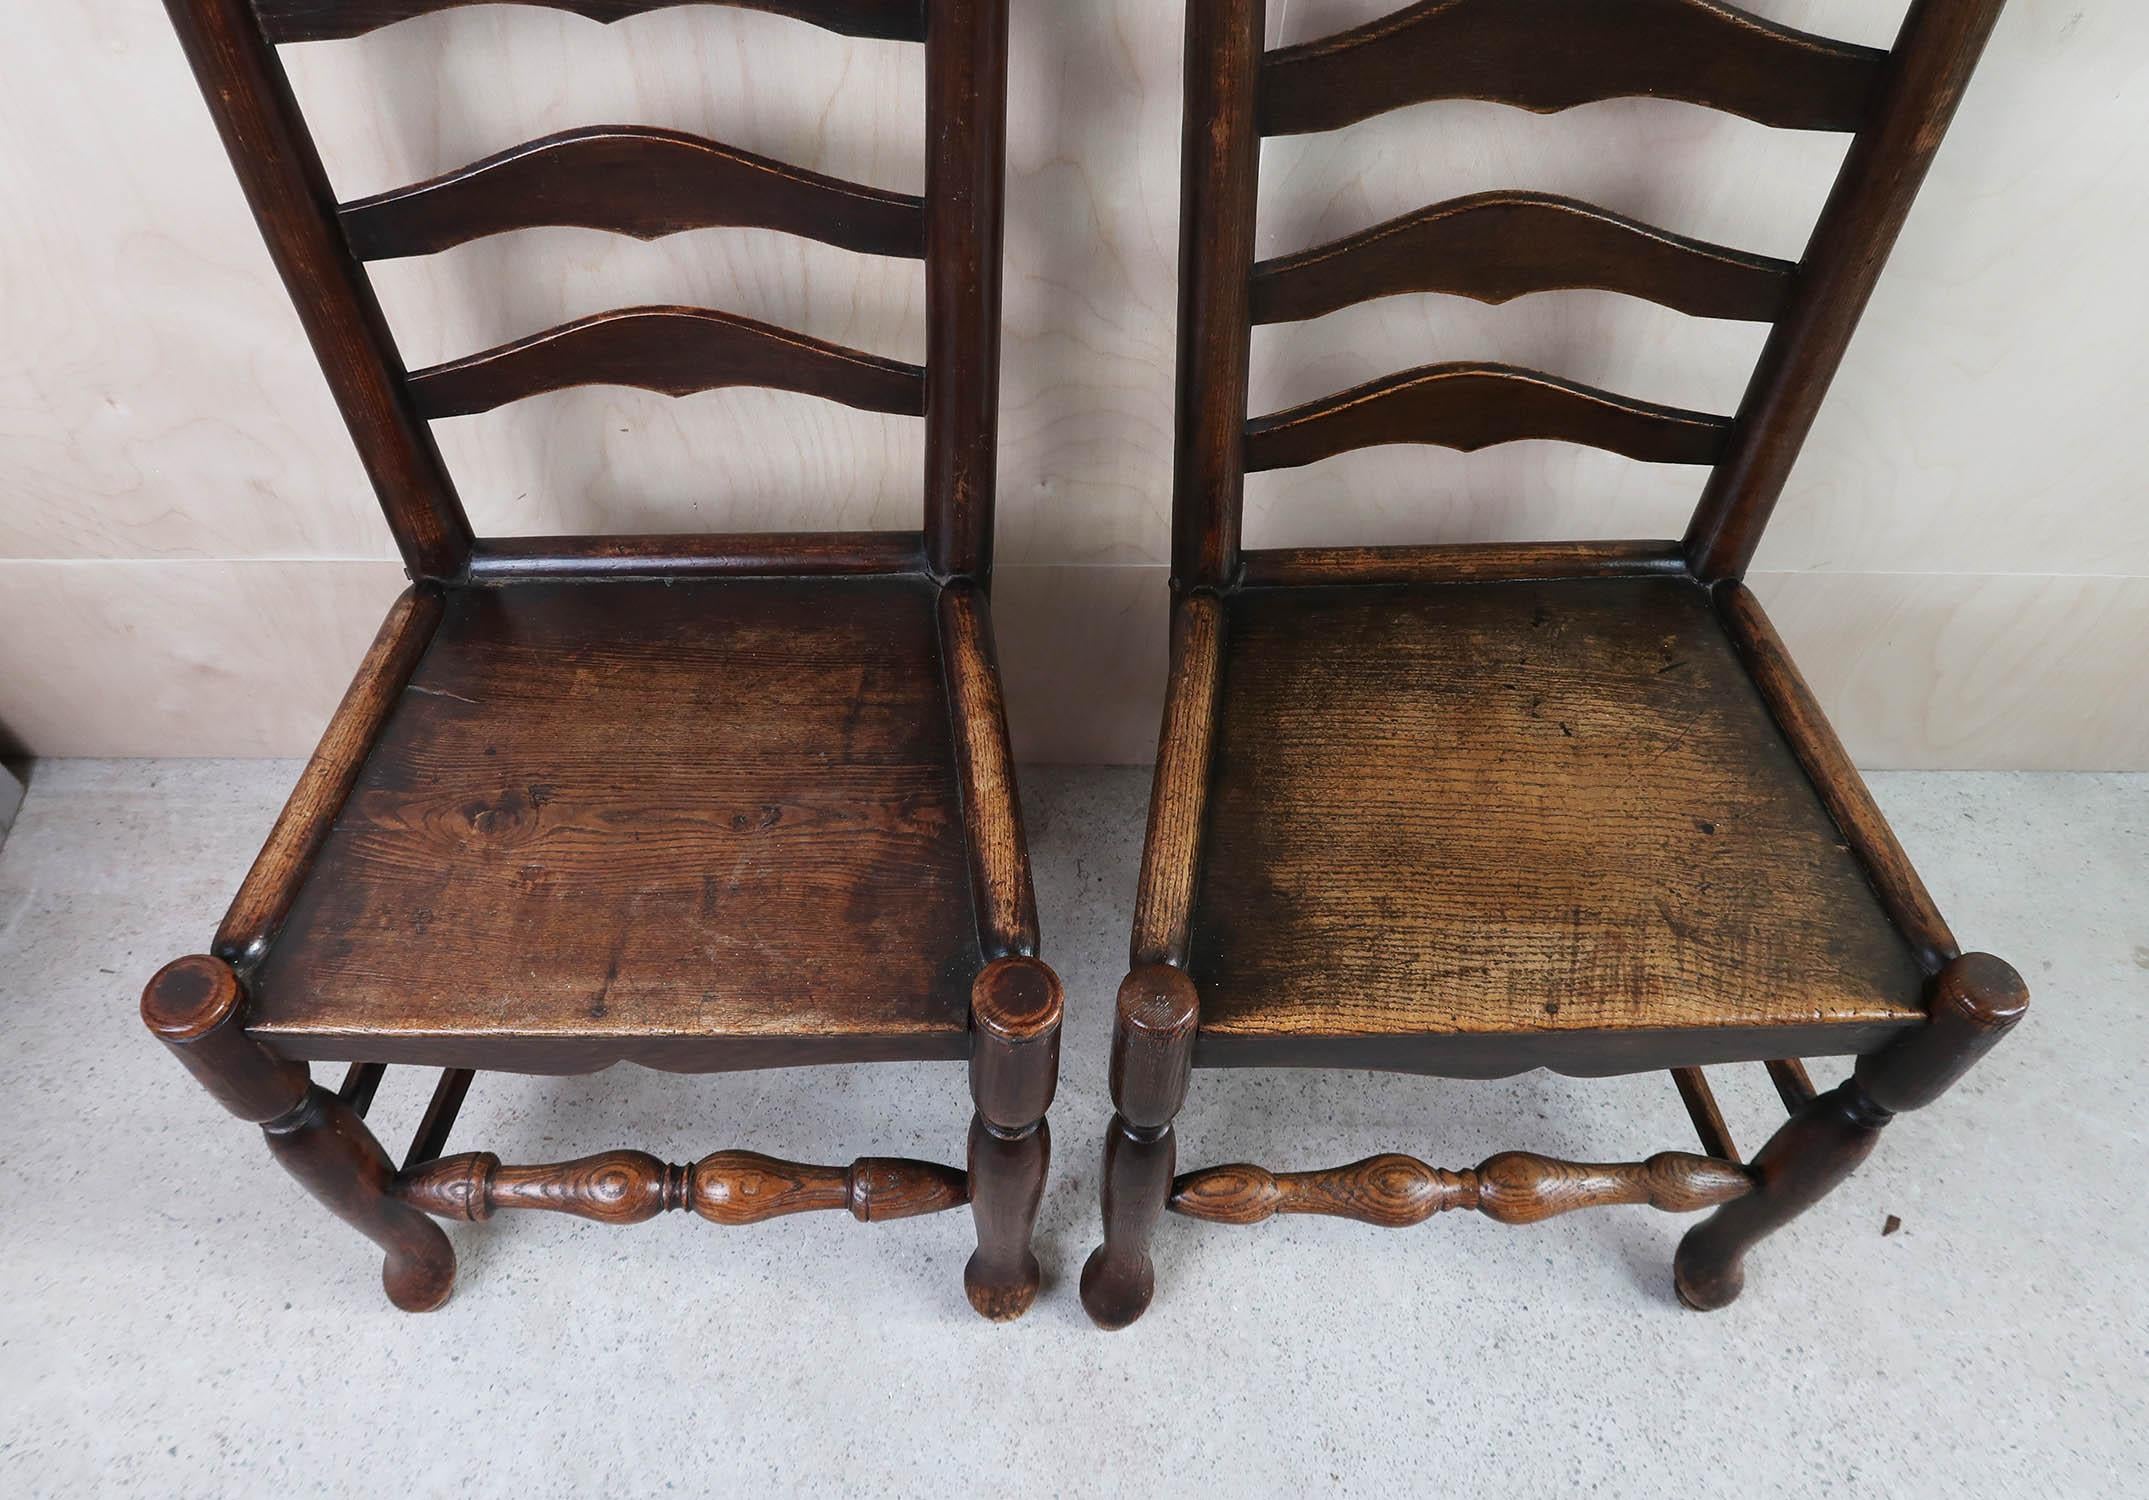 Polished Near Pair of Antique Welsh Country Ladder back Chairs. C.1800 For Sale